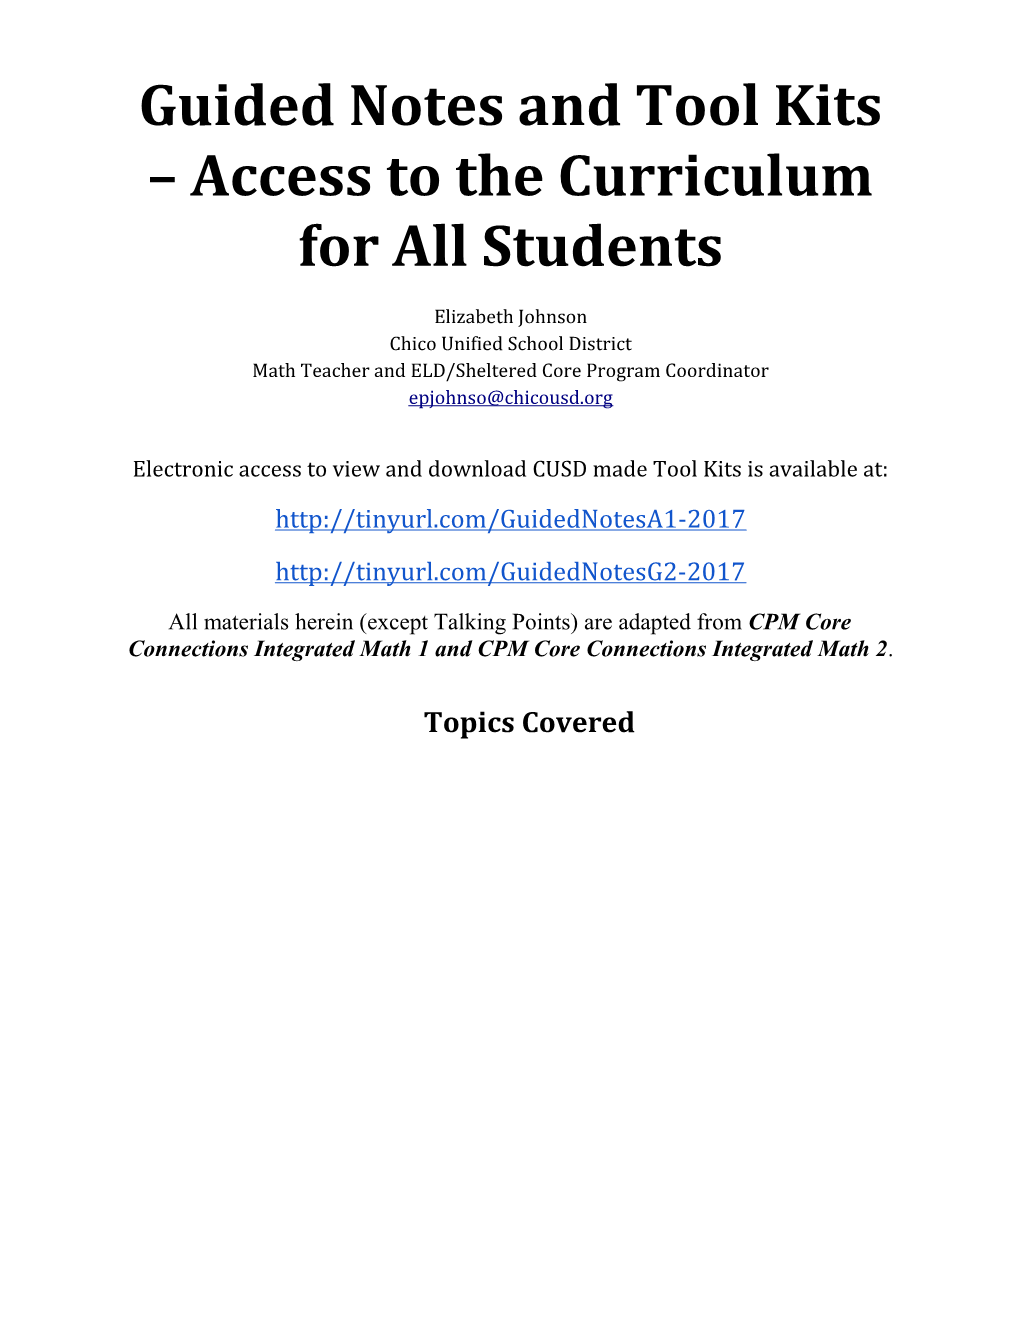 Guided Notes and Tool Kits Access to the Curriculum for All Students